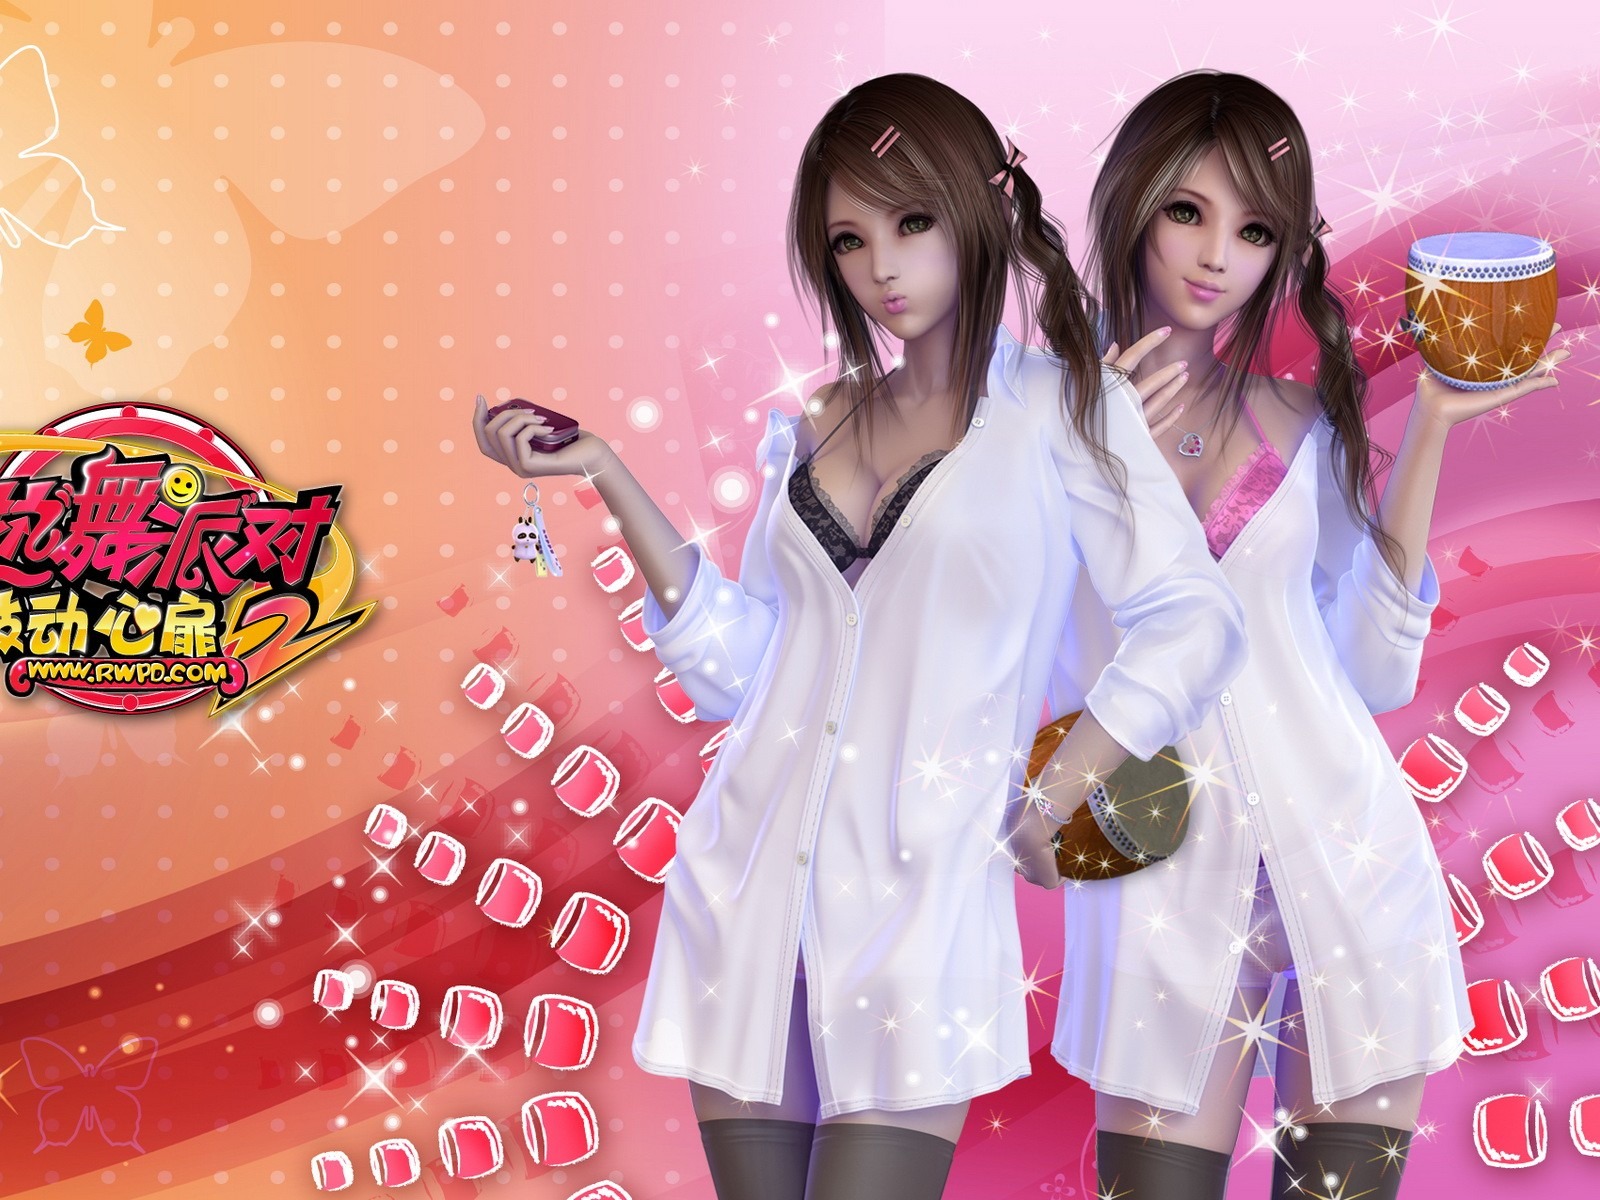 Online game Hot Dance Party II official wallpapers #12 - 1600x1200